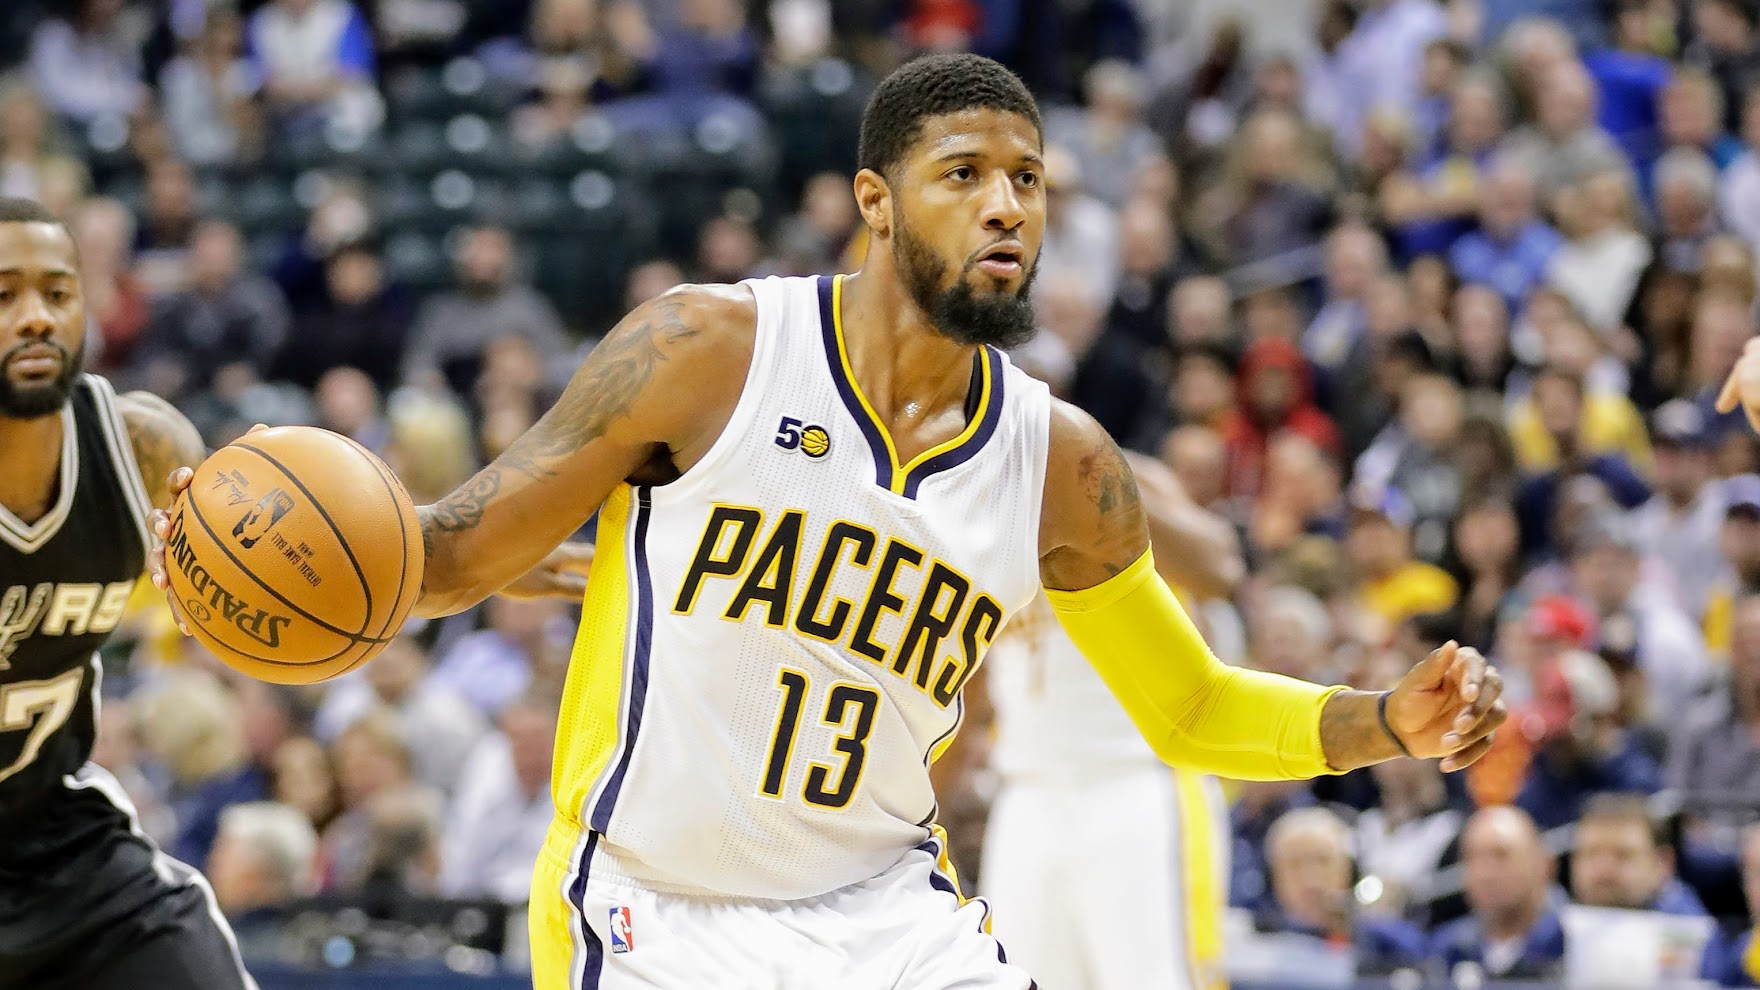 Paul George plans to leave Pacers in free agency: report